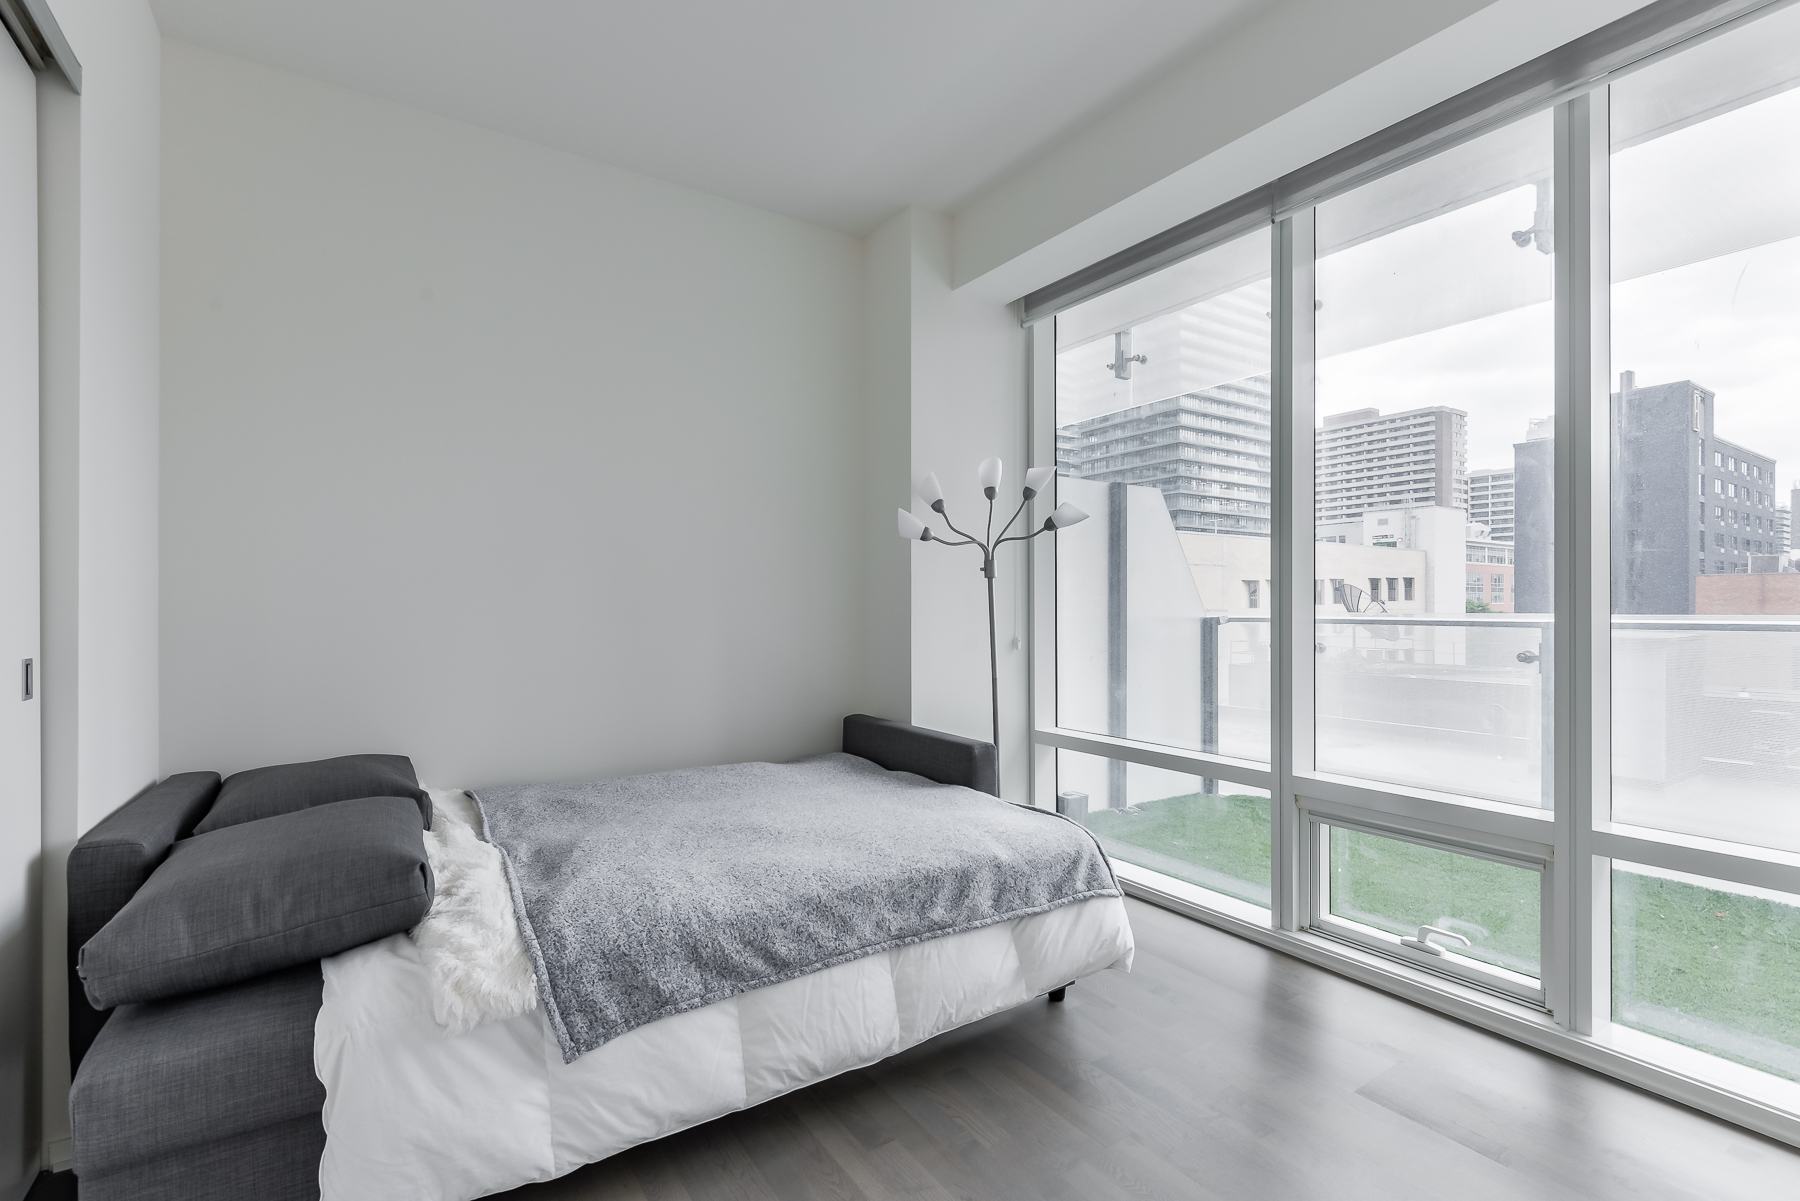 2nd bedroom and balcony view - 1 Bloor St E Unit 310 Toronto.